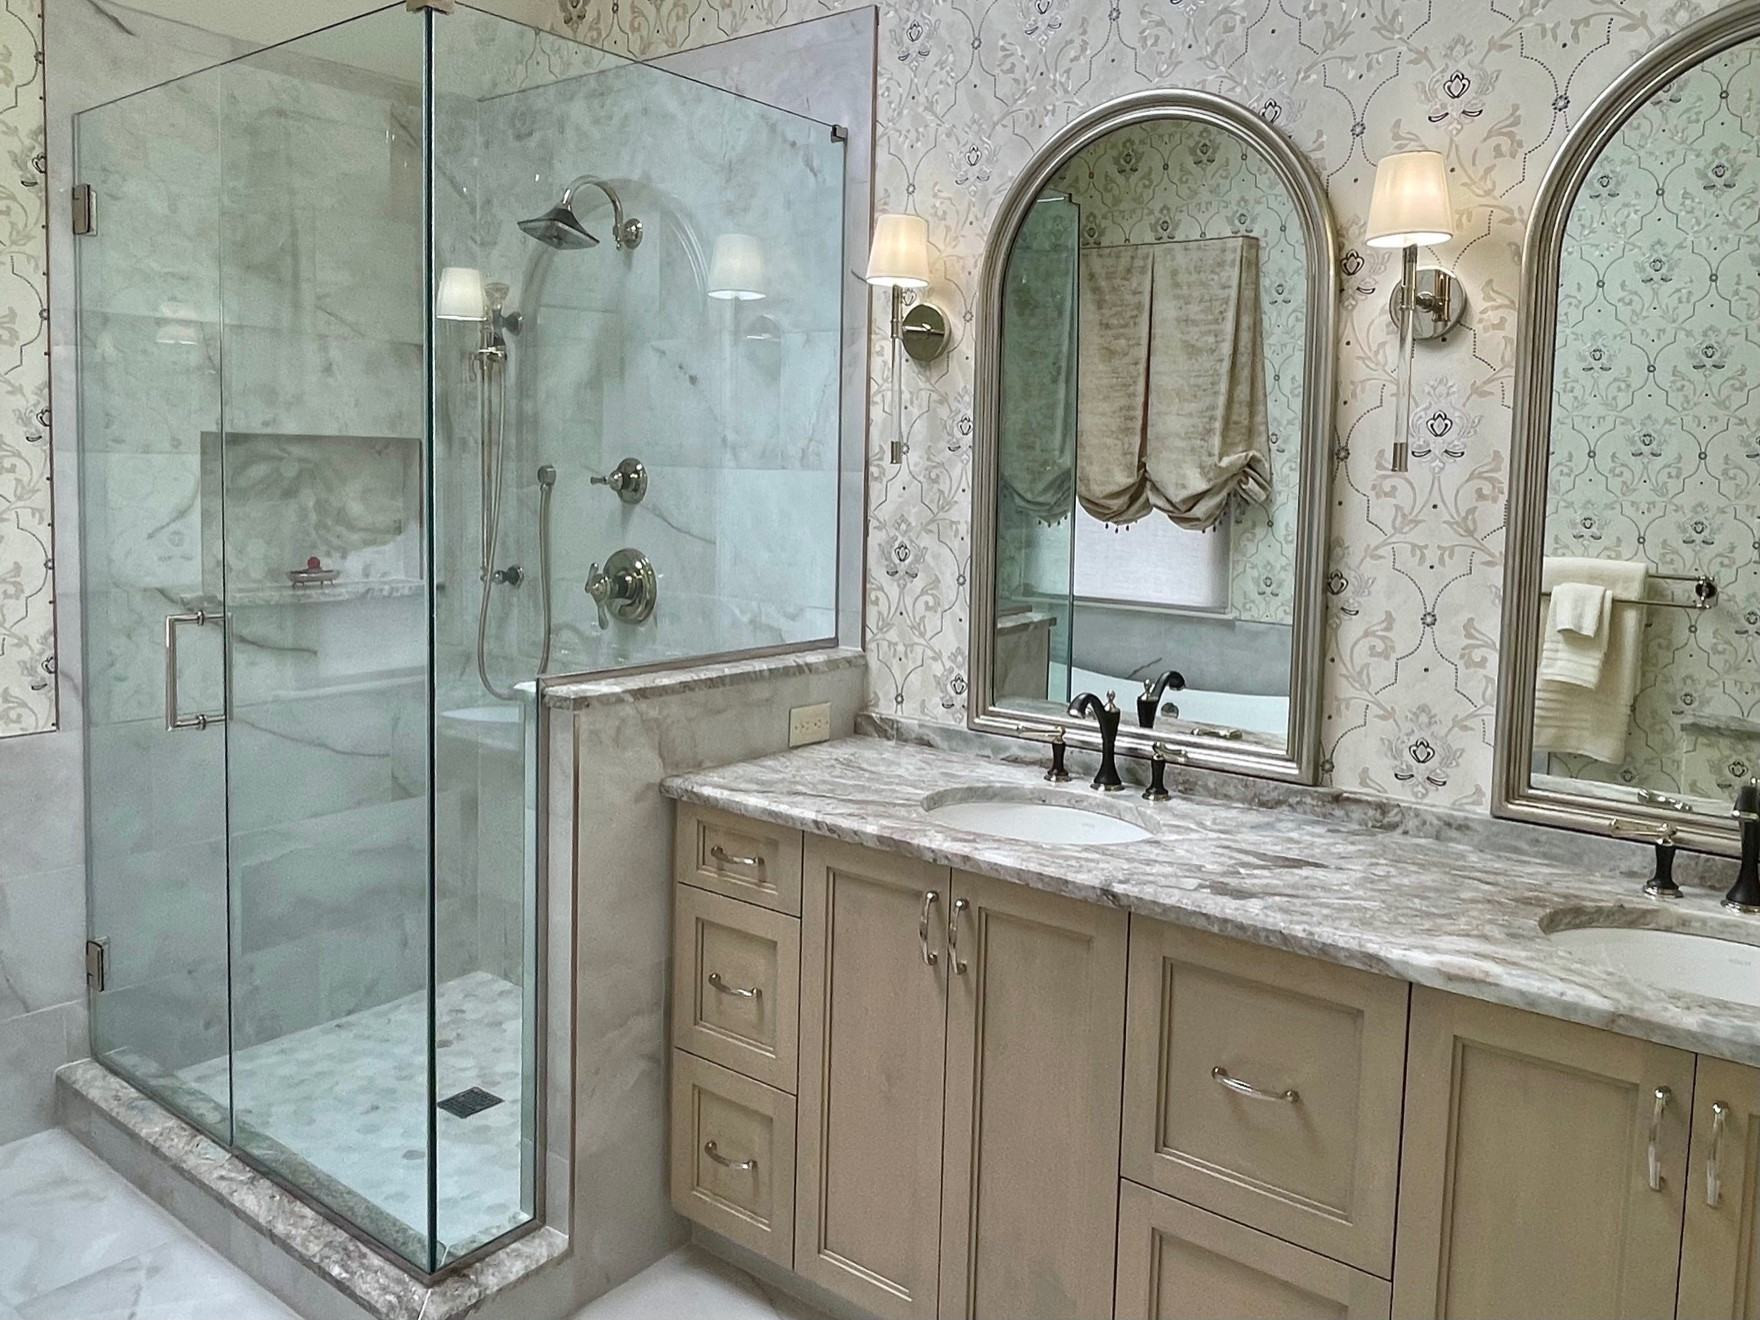 Master bathroom received full makeover from a traditional design with floral wallpaper transitioned into a fresh and updated design! Making your bathroom fresh and beautiful adds joy into your life.